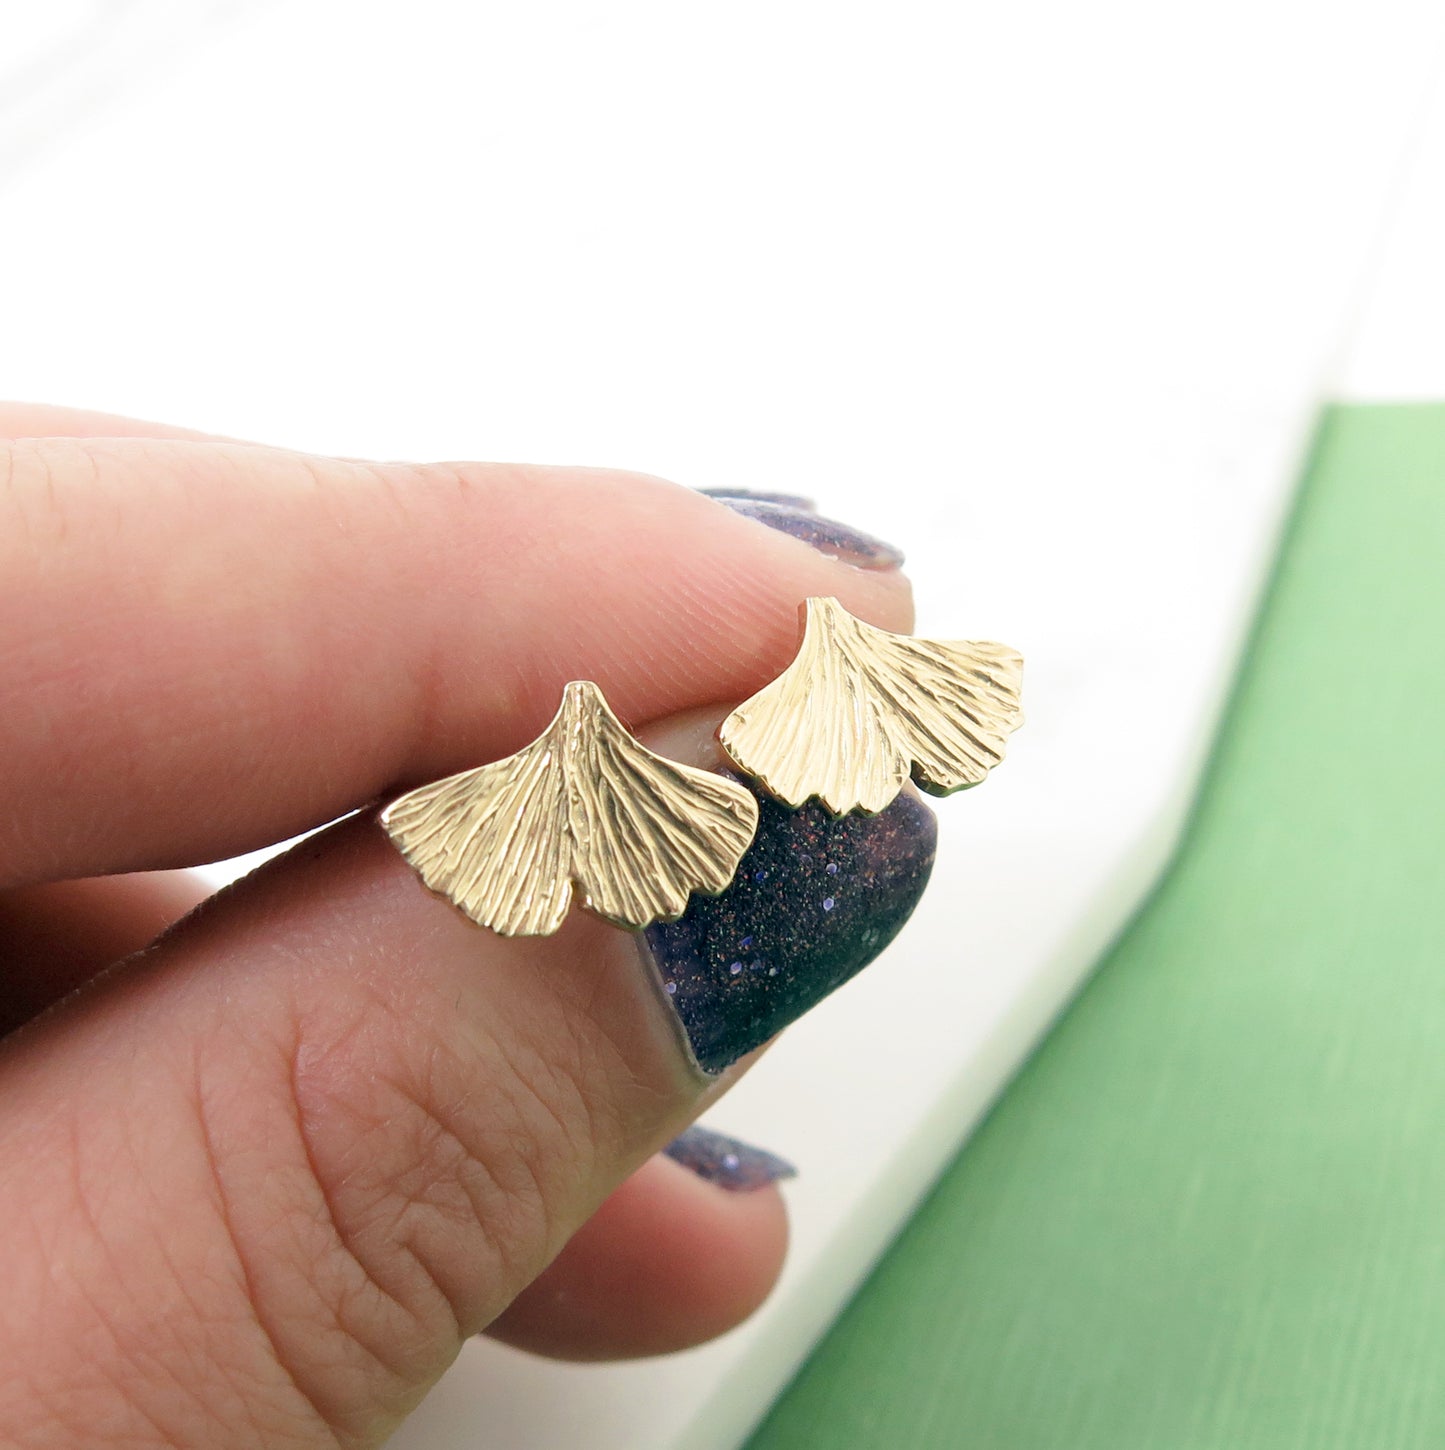 Textured gold ginkgo leaf stud earrings in a hand with nail polish on the nails.